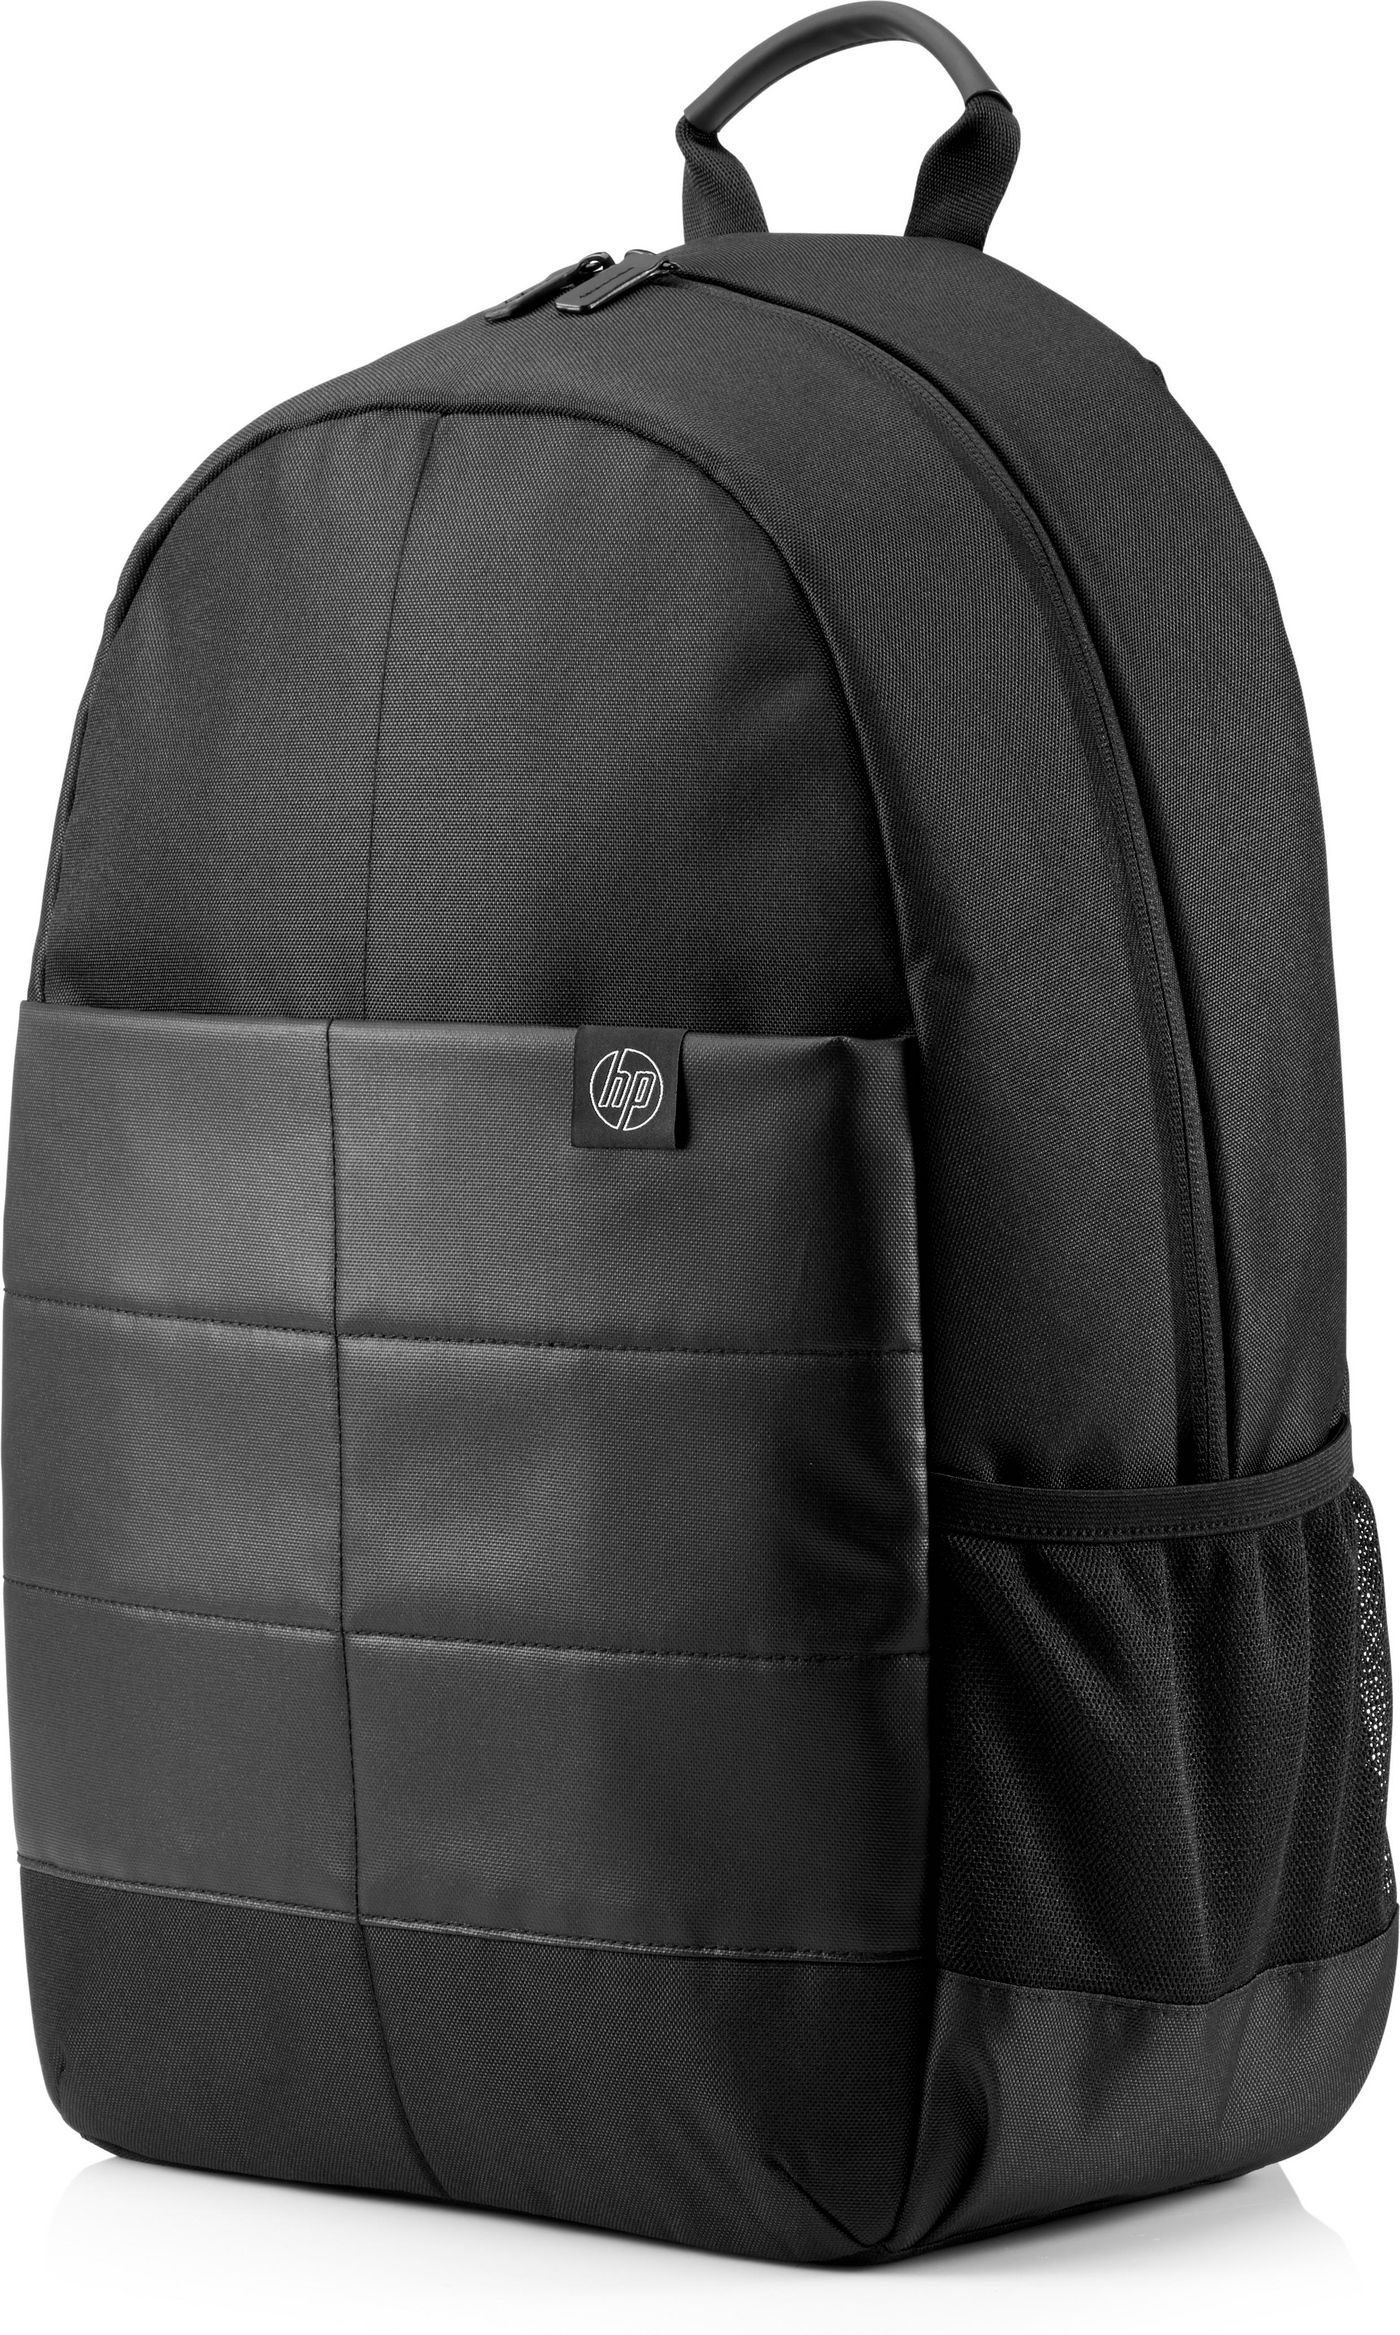 Classic - 15.6in Notebook Backpack